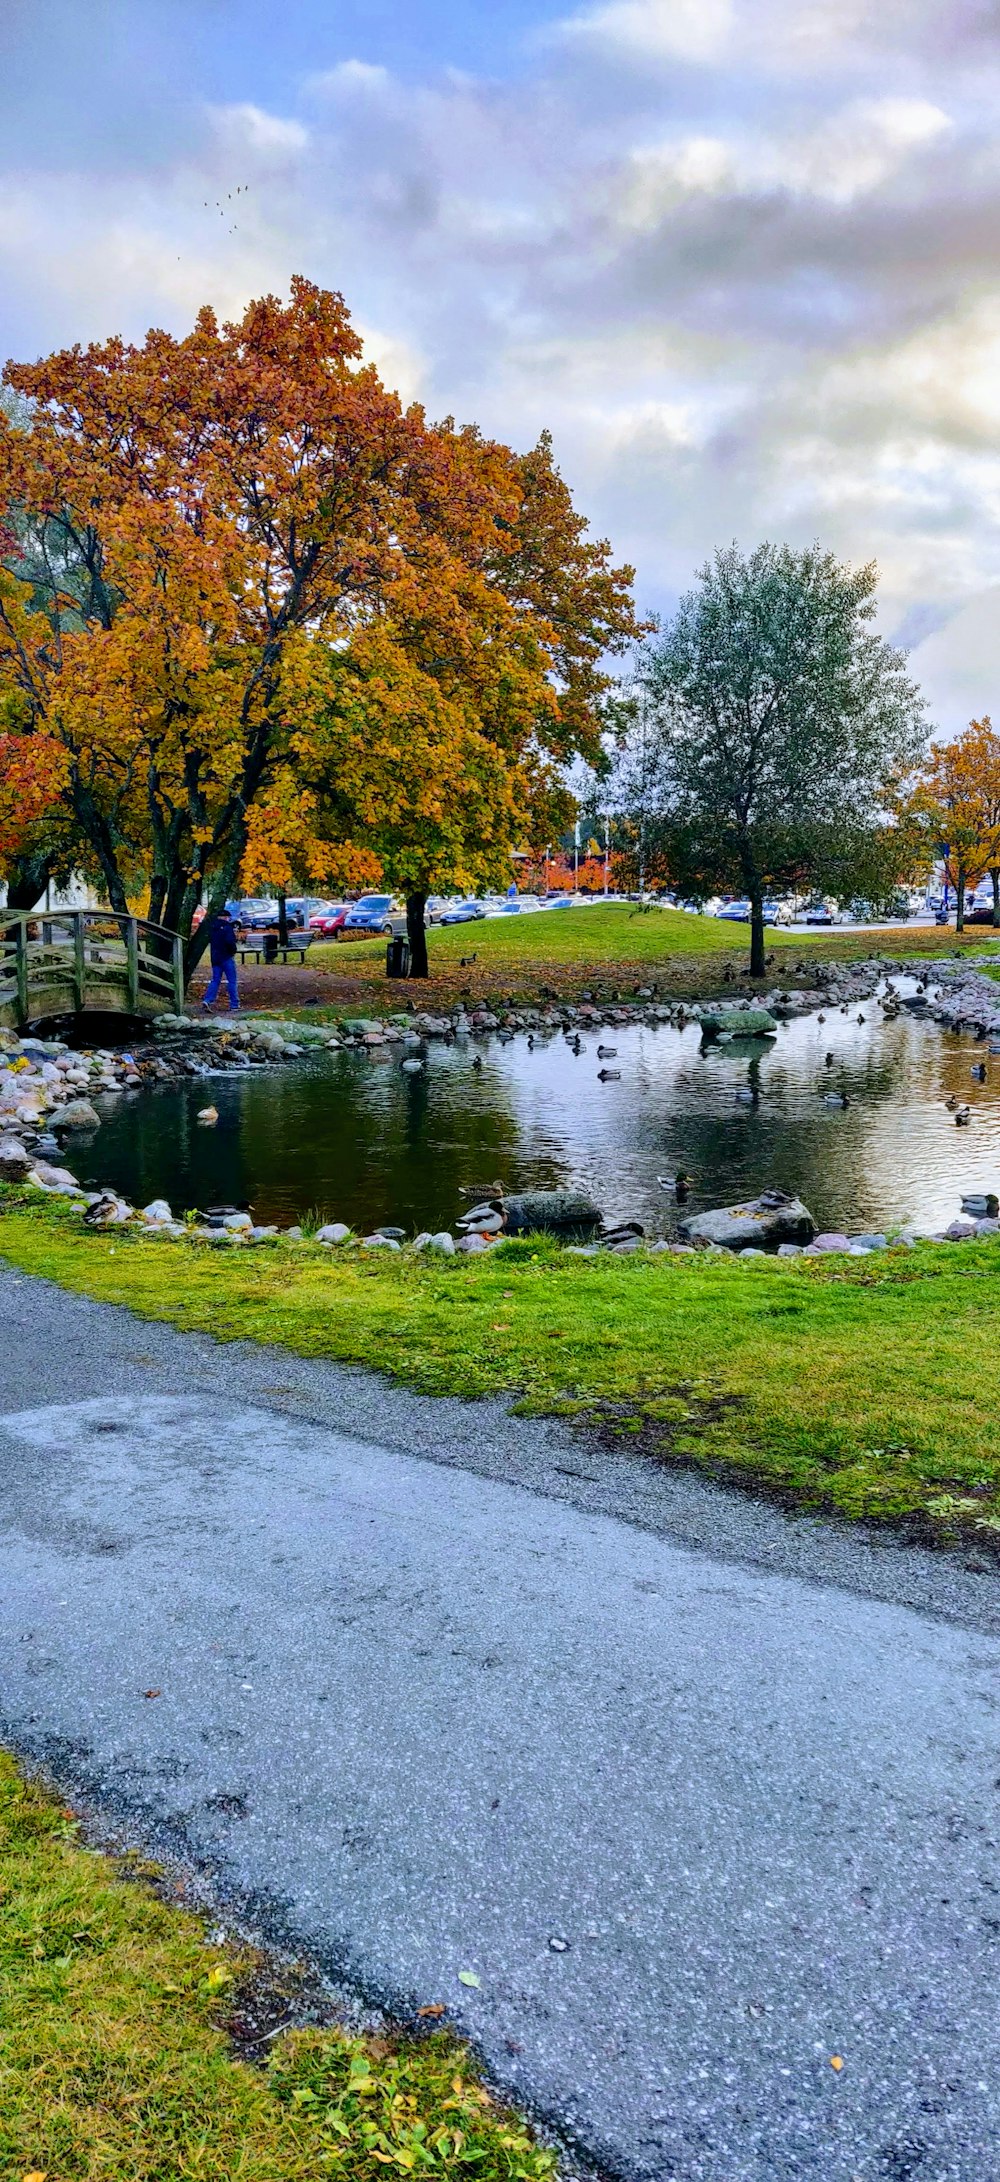 a small pond in a park with trees in the background